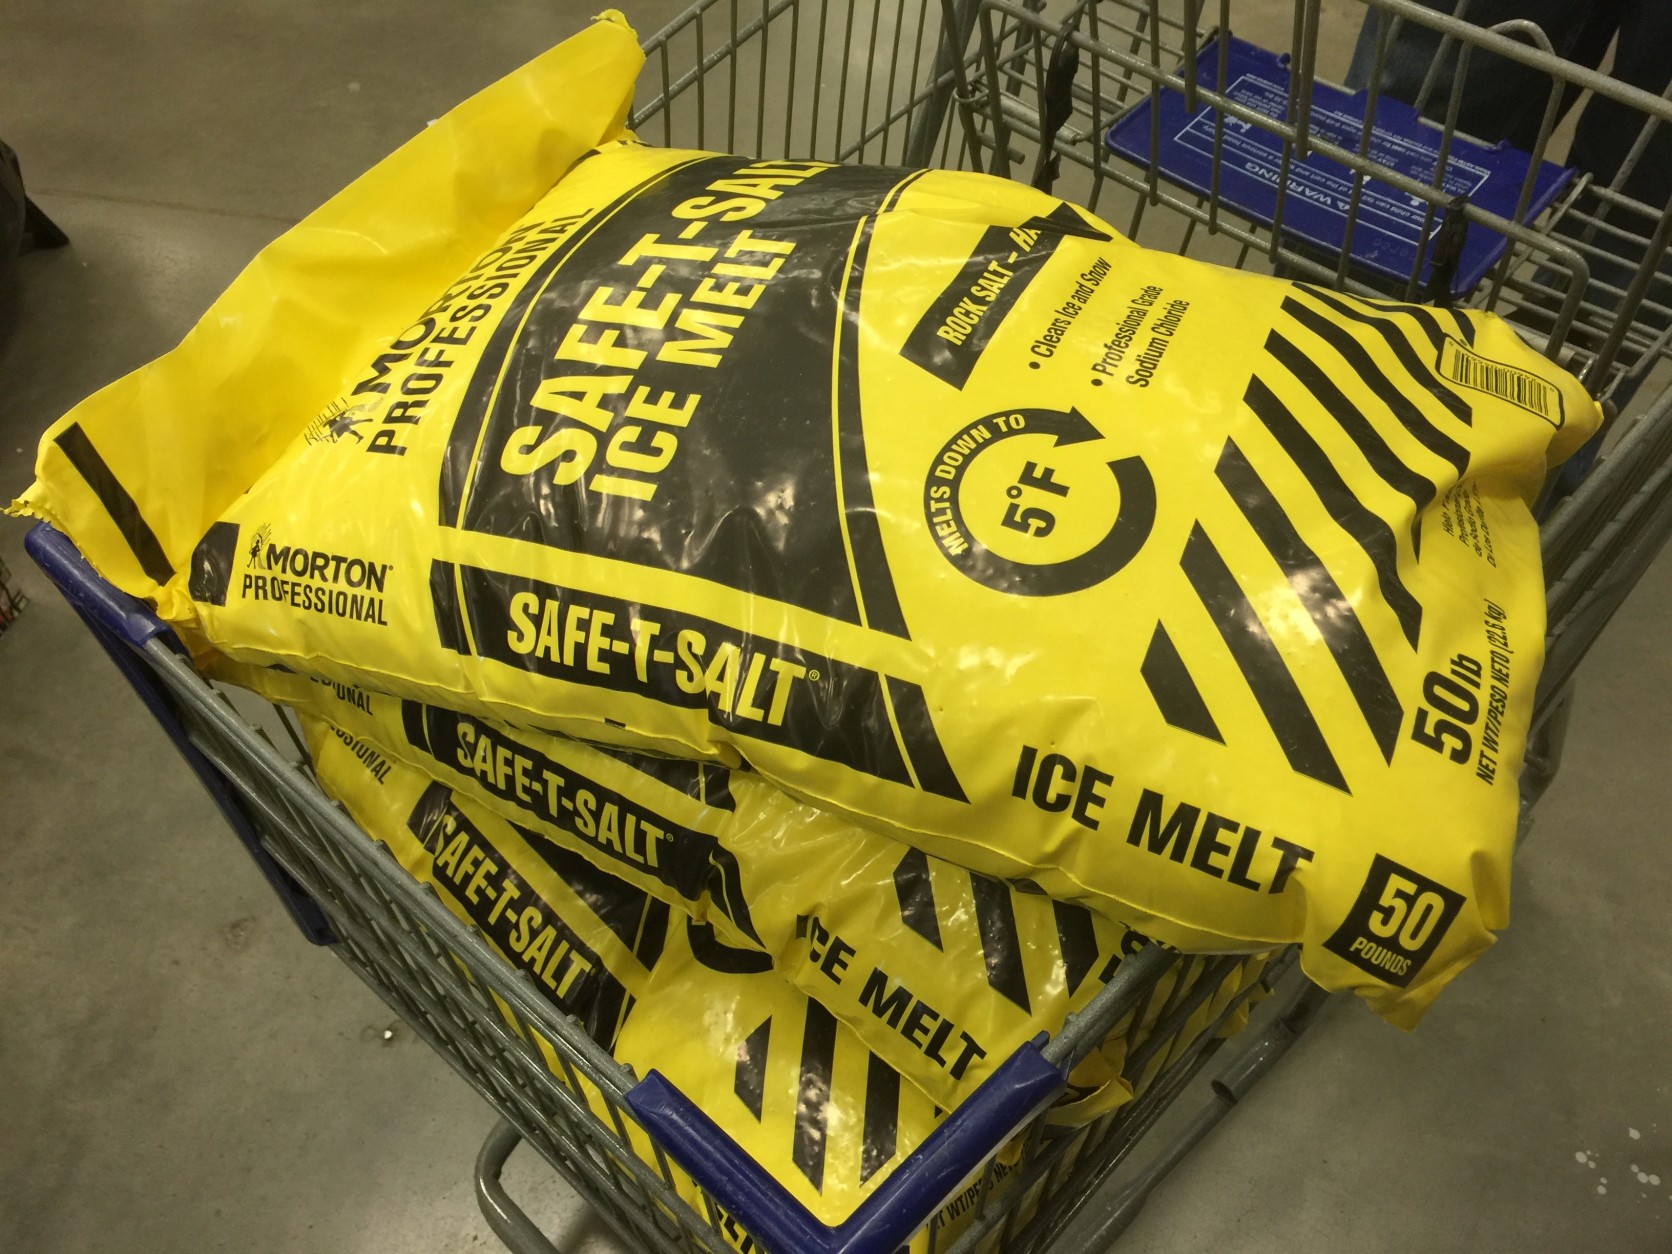 Sodium Chloride(pictured) also known as rock salt can damage asphalt, concrete, brick, stone, metal, grass, plants and wood decks and can be lethal to pets if ingested. An evaluation of various types of ice-melt by 
http://www.consumerreports.org/cro/2014/02/best-ice-melts/index.htm
Consumer Reports finds Magnesium Chloride, Potasium Chloride and Urea/Carbonly Diamide are best for gardeners and pet owners. 